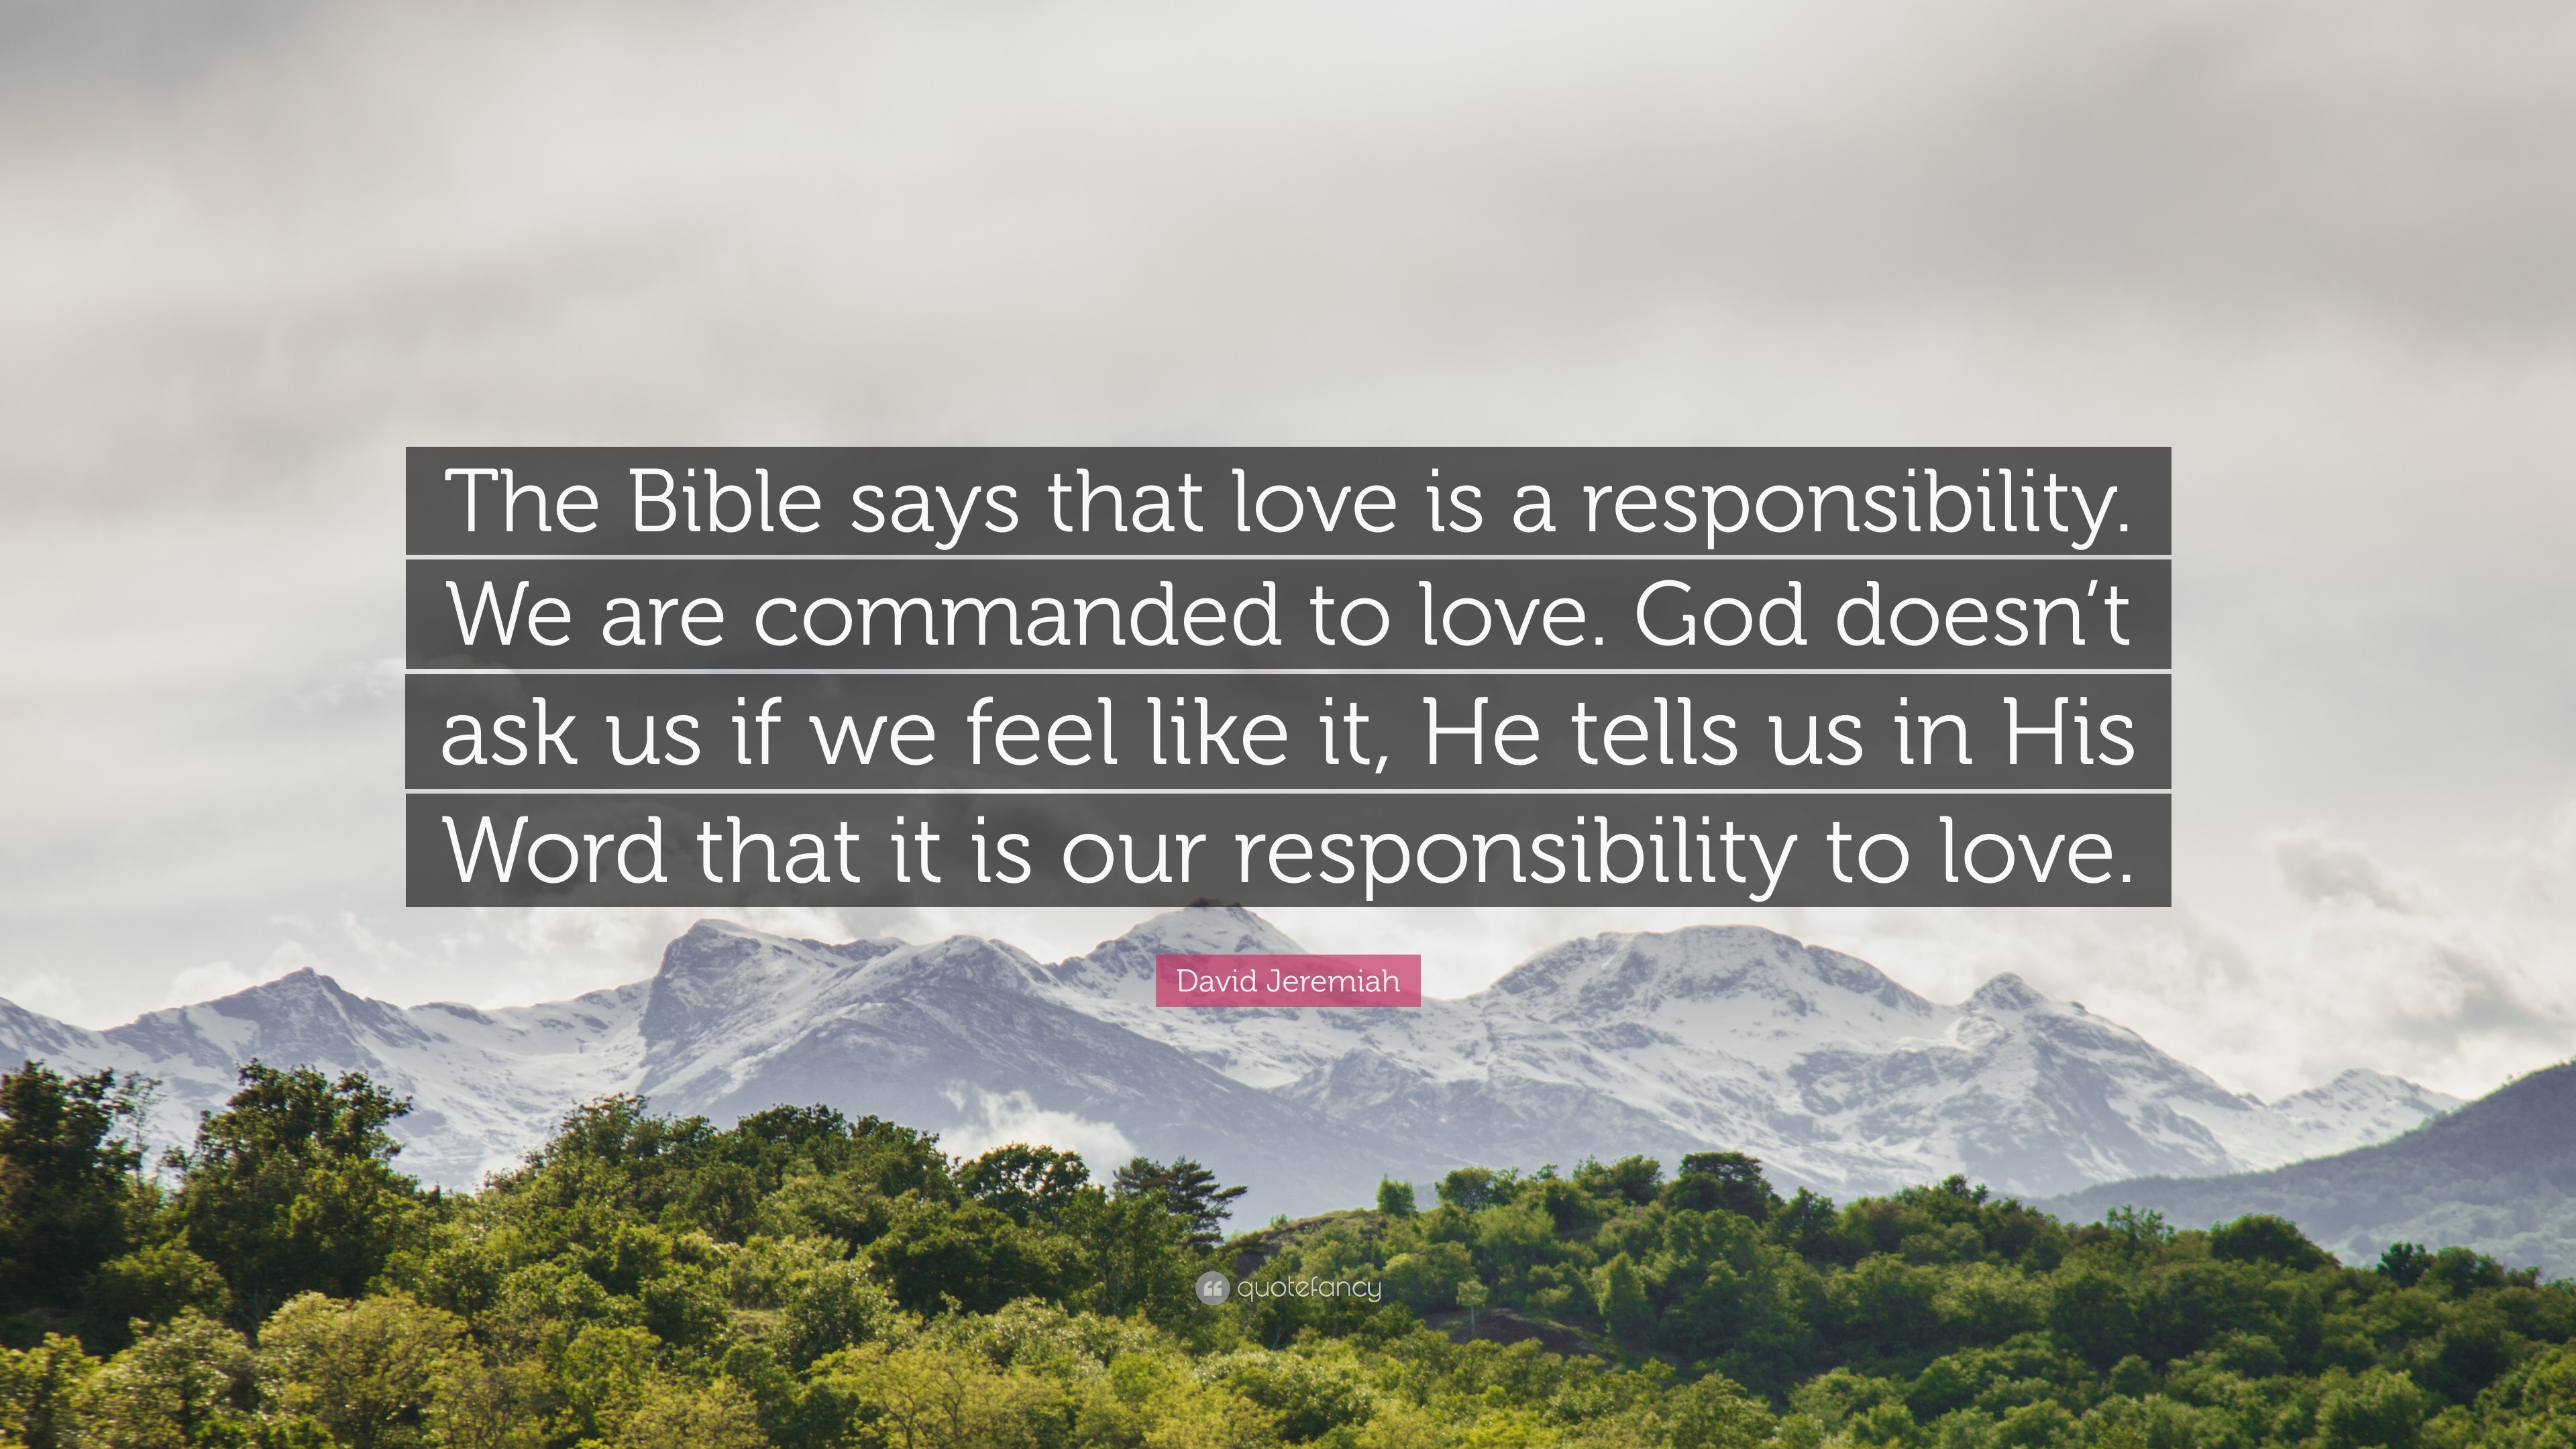 David Jeremiah Quote “The Bible says that love is a responsibility We are